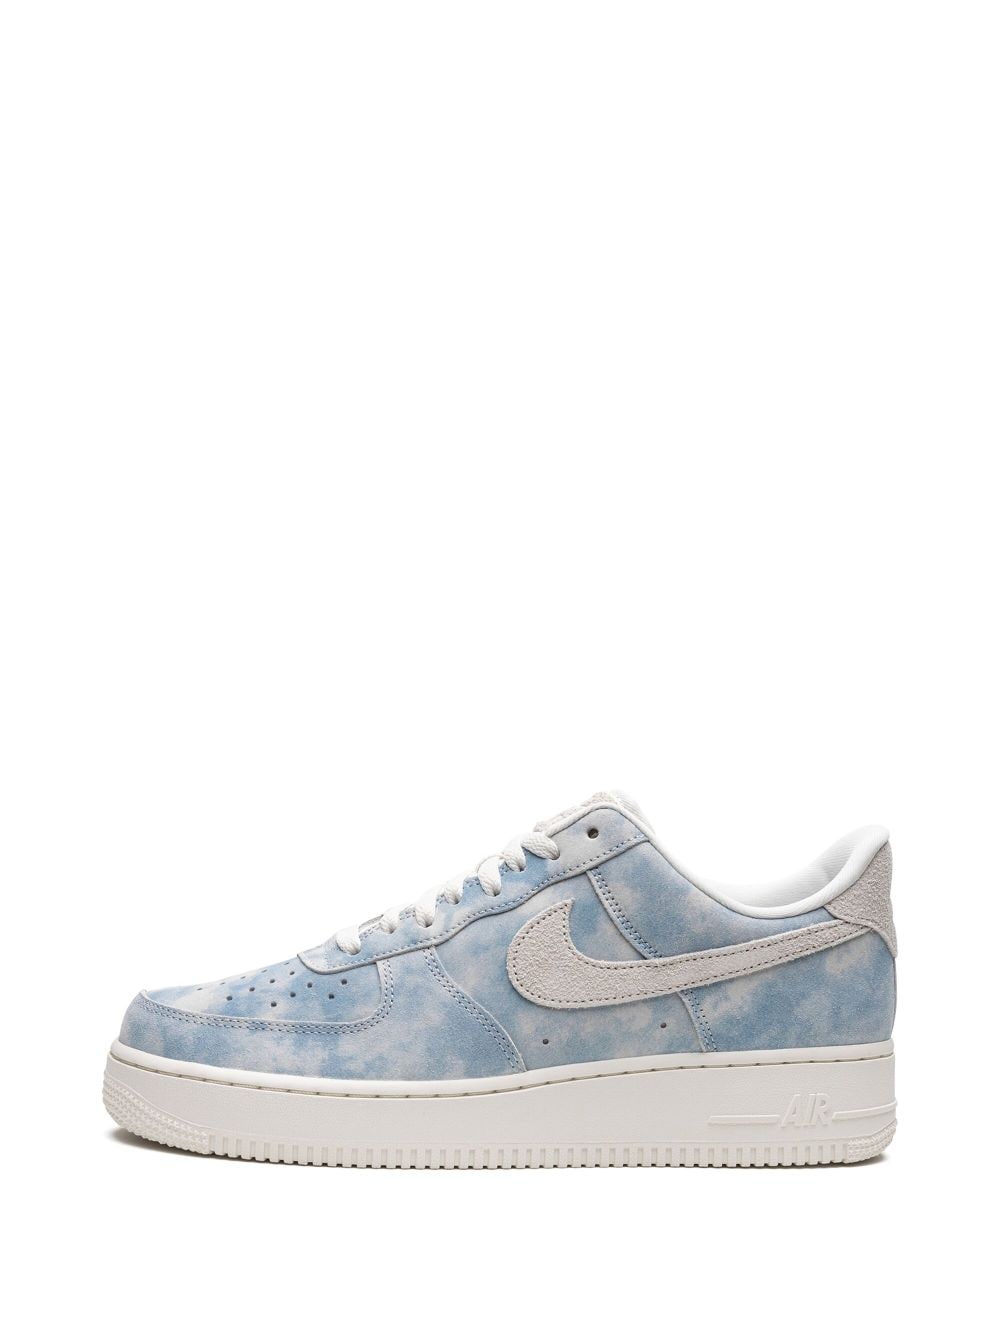 Nike Air Force 1 Low SE "Clouds" sneakers Blue